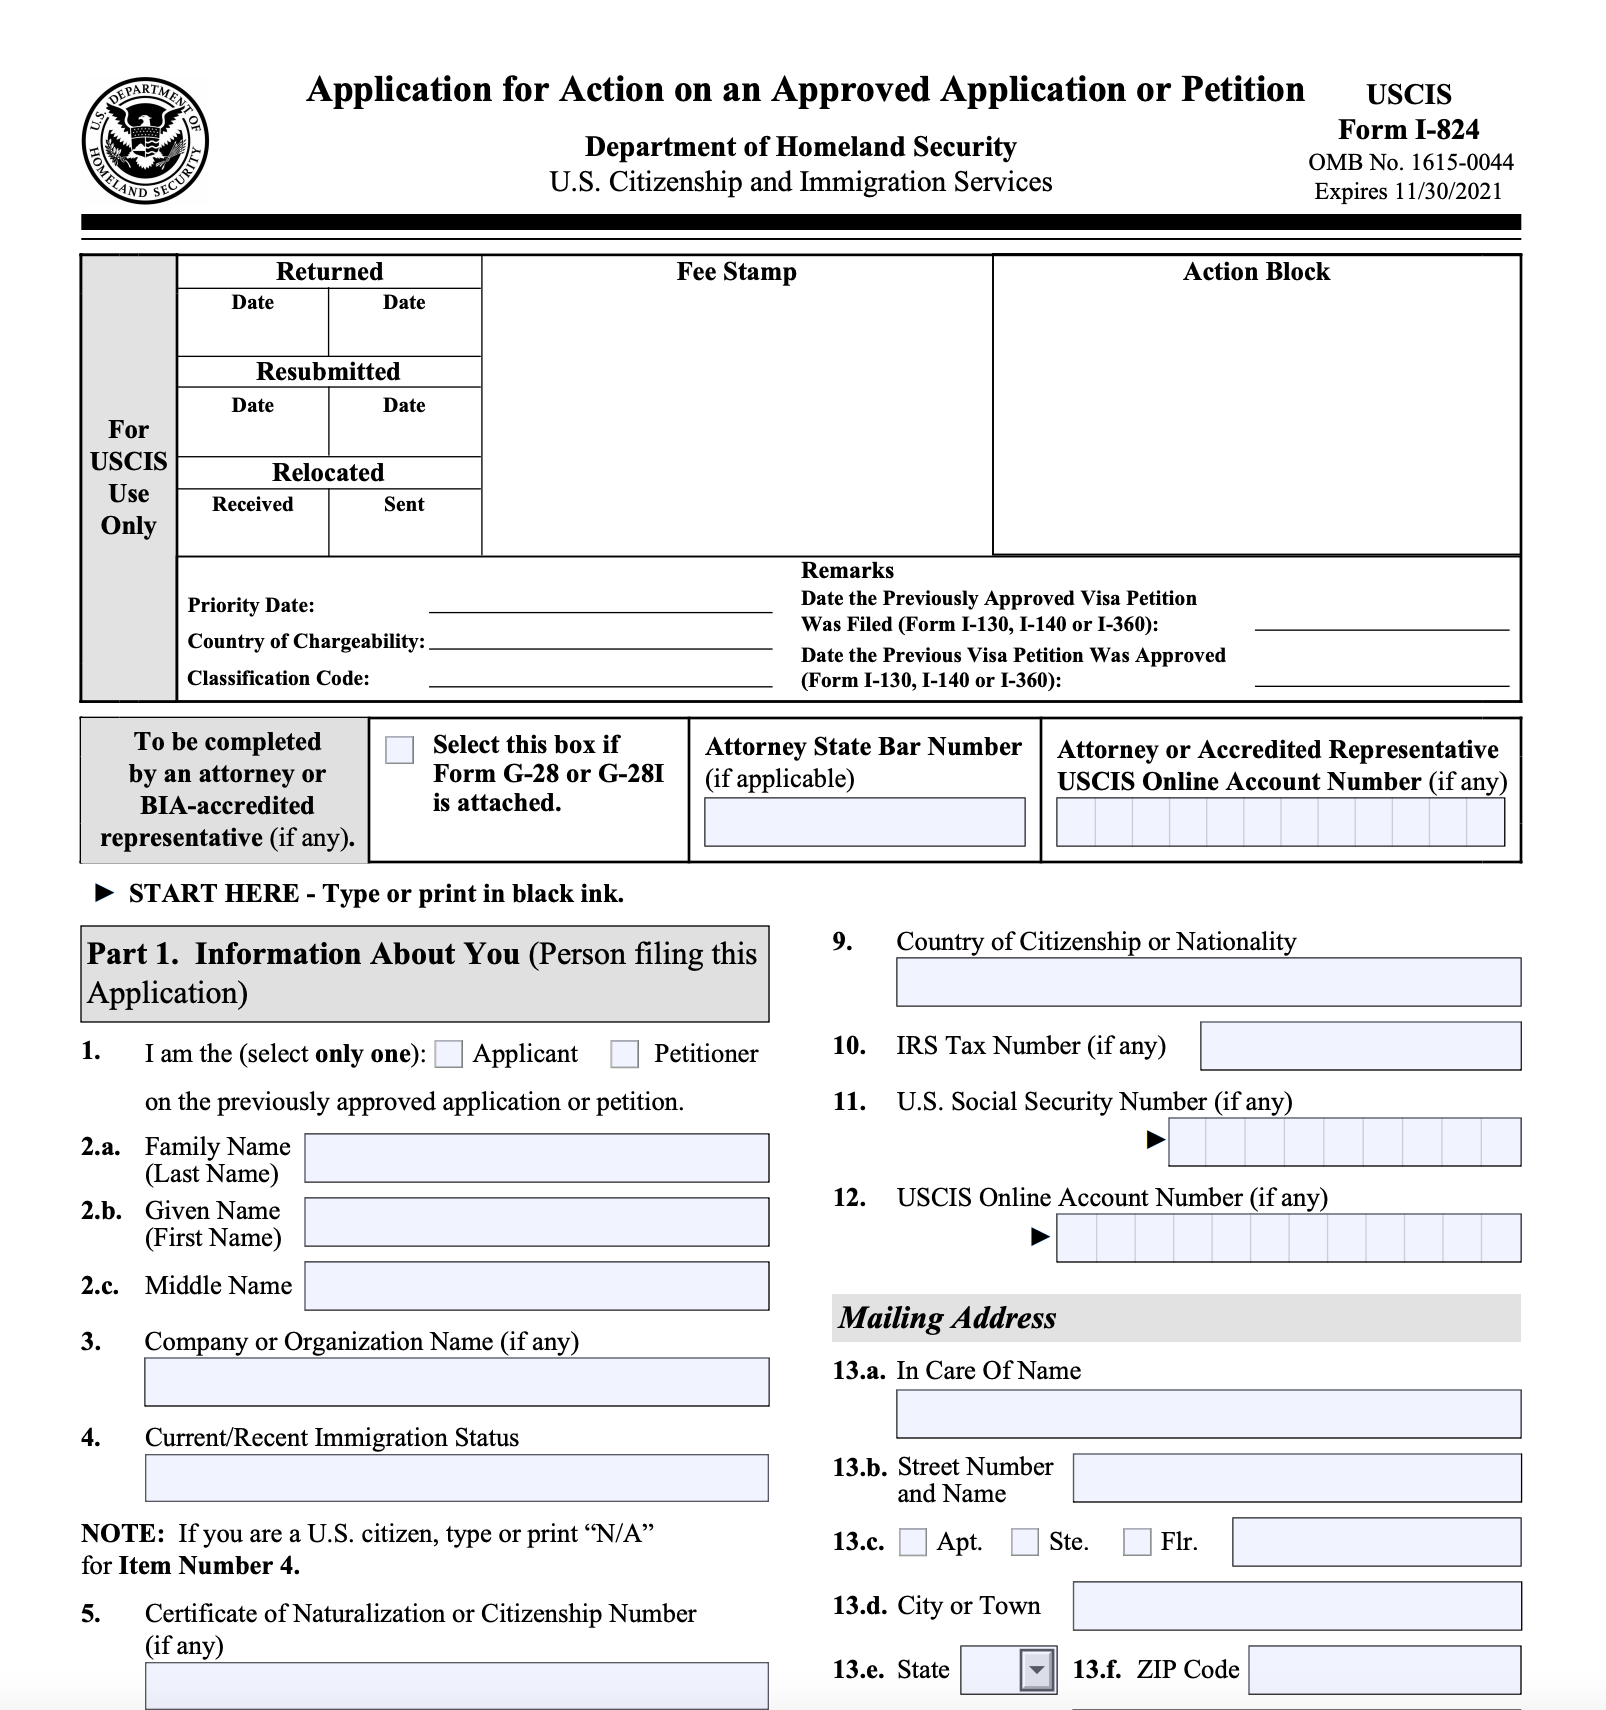 form-i-824-explained-filing-tips-fees-processing-time